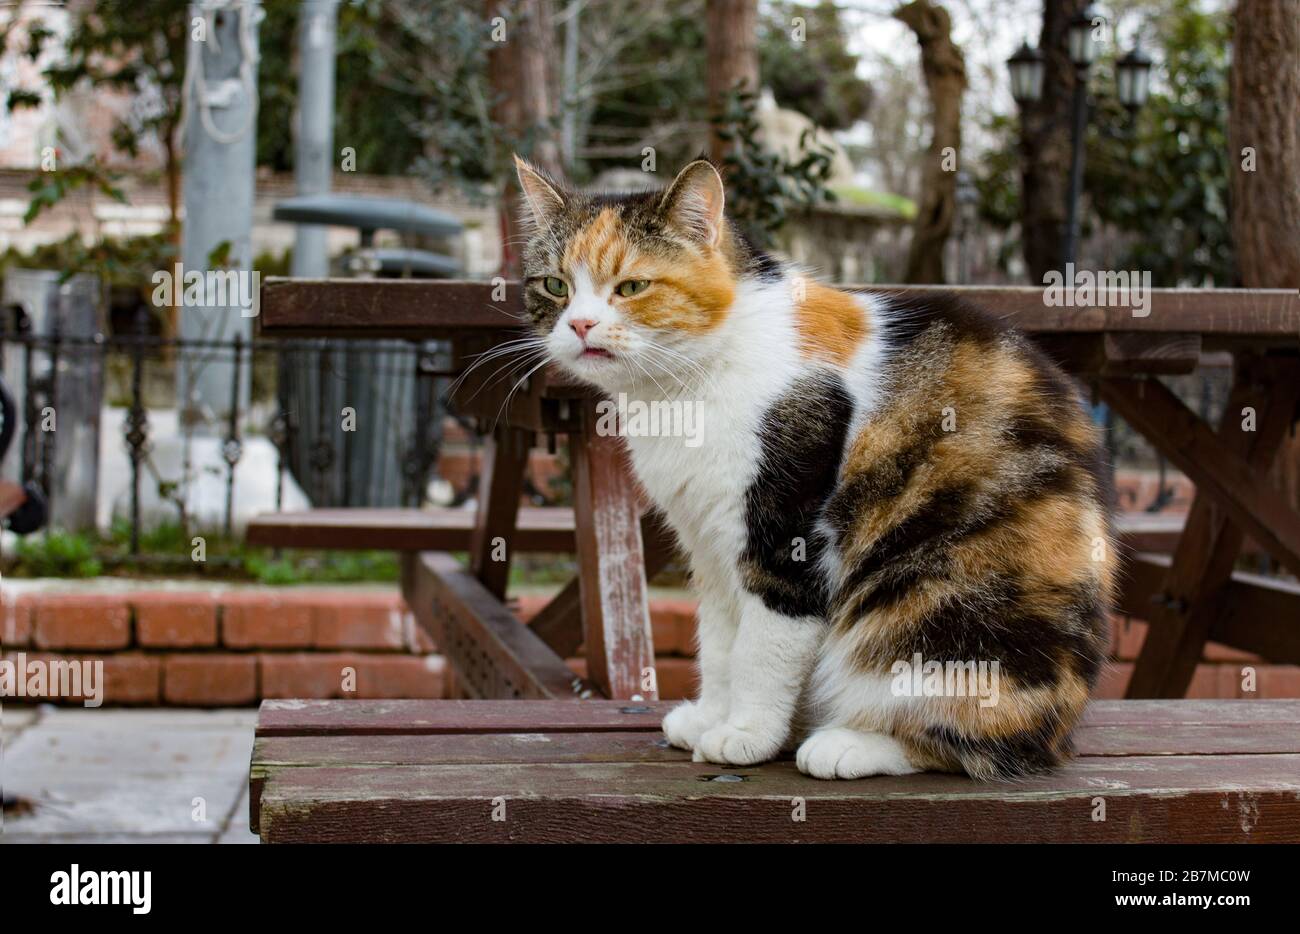 Outdoors full length profile portrait of a stray calico cat with natural facial imperfections, making it seem like a bored, sour cat. Stock Photo